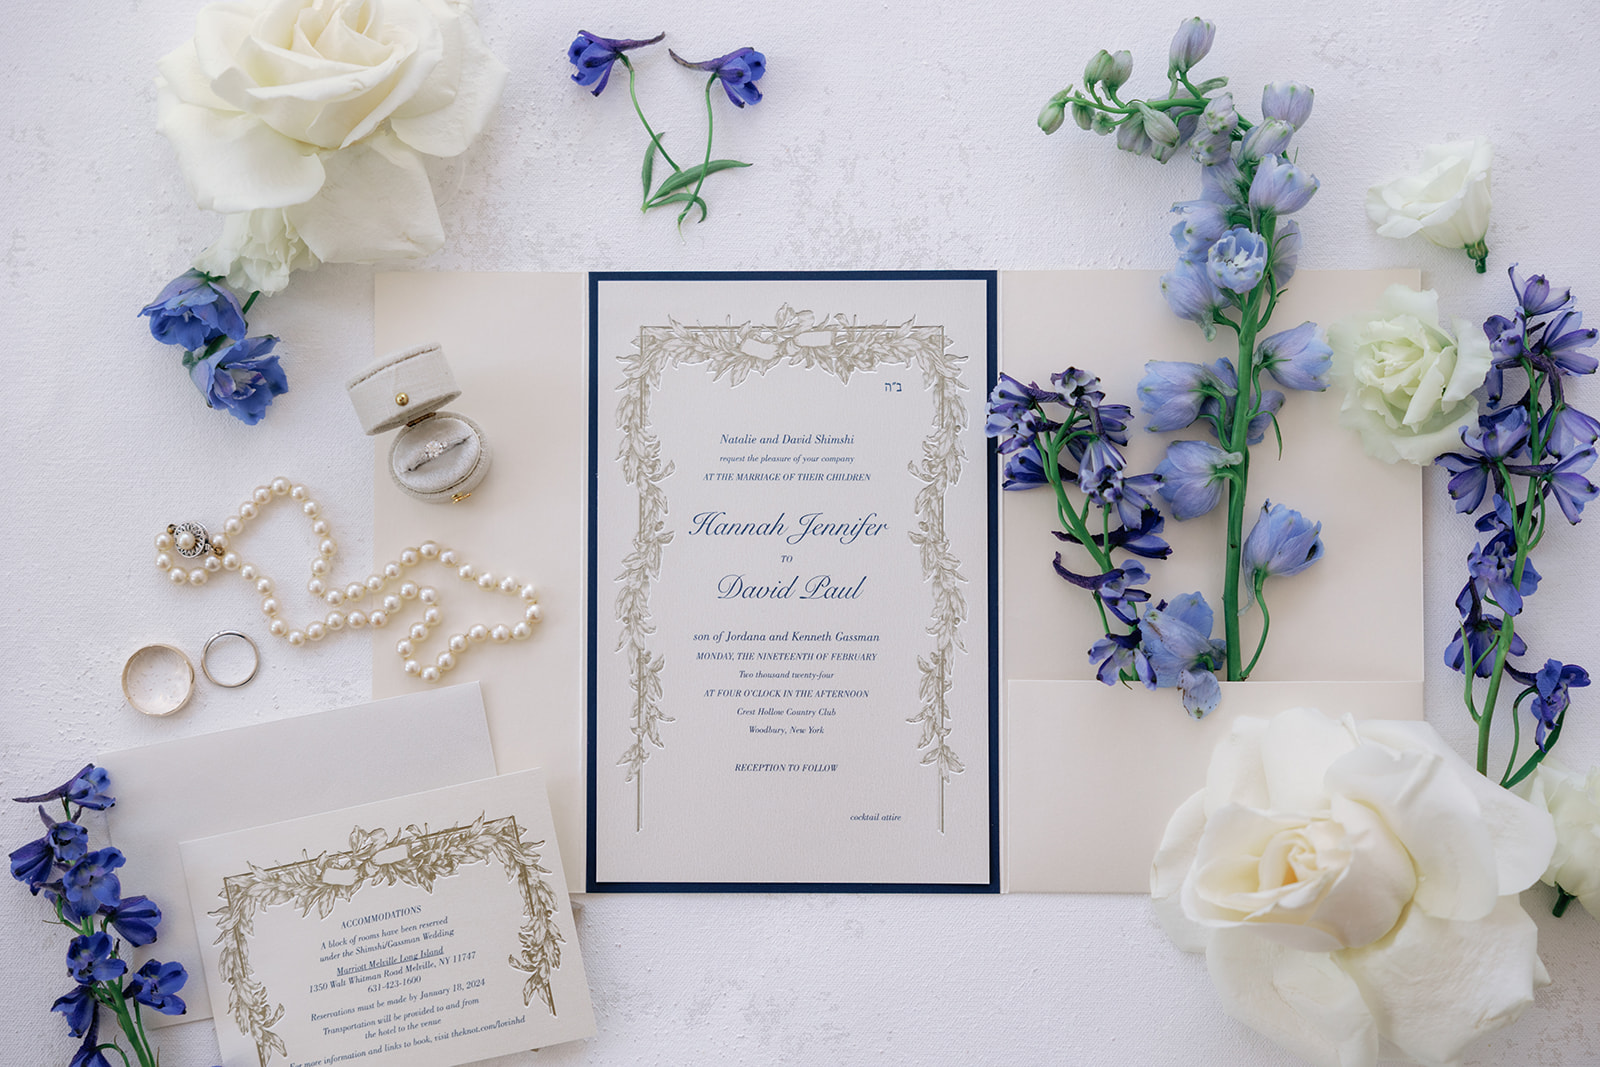 Details of a bride's invitations, flowers and jewelry sitting on a table